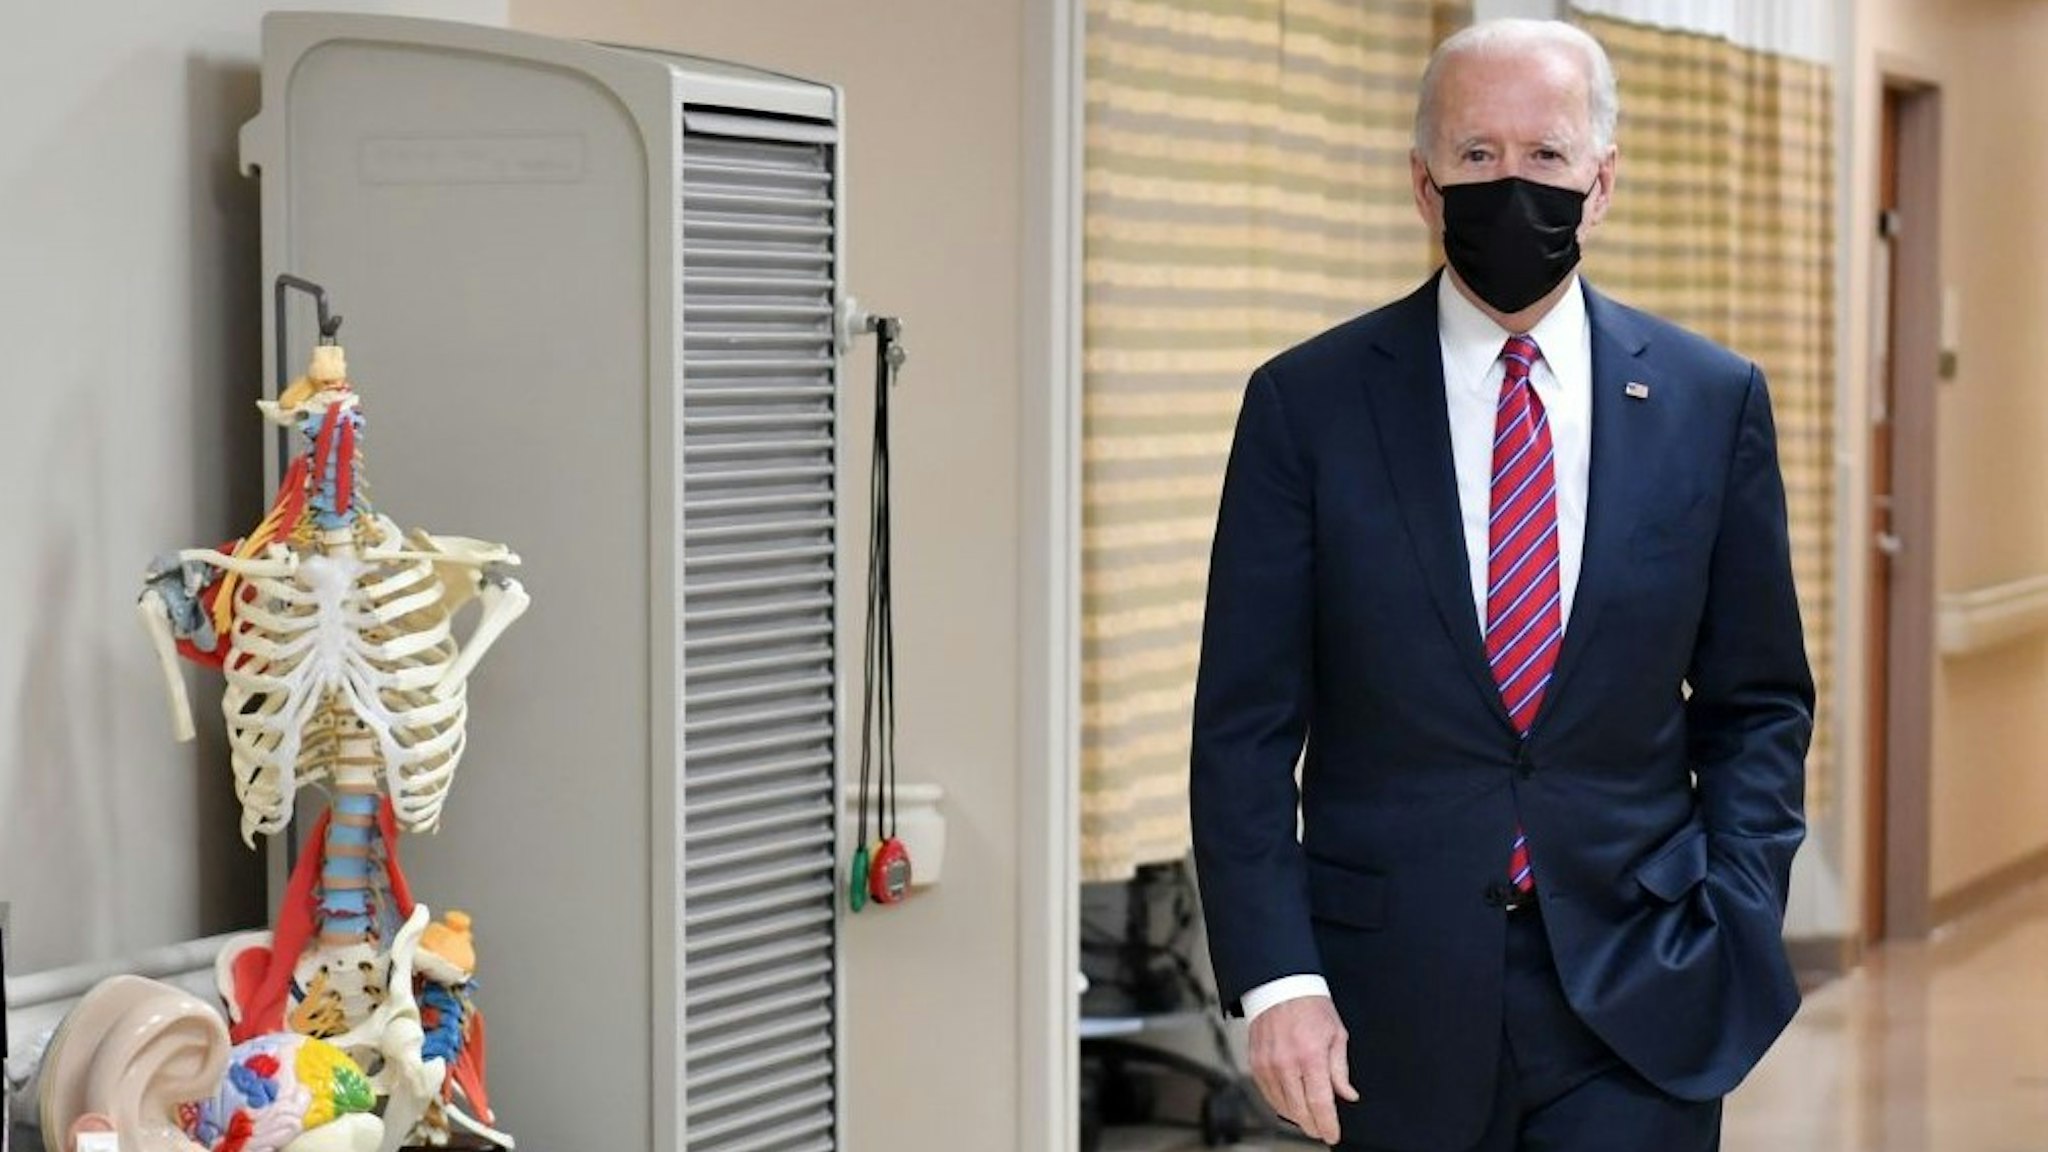 US President Joe Biden visits Walter Reed National Military Medical Center in Bethesda, Maryland, on January 29, 2021. (Photo by Nicholas Kamm / AFP) (Photo by